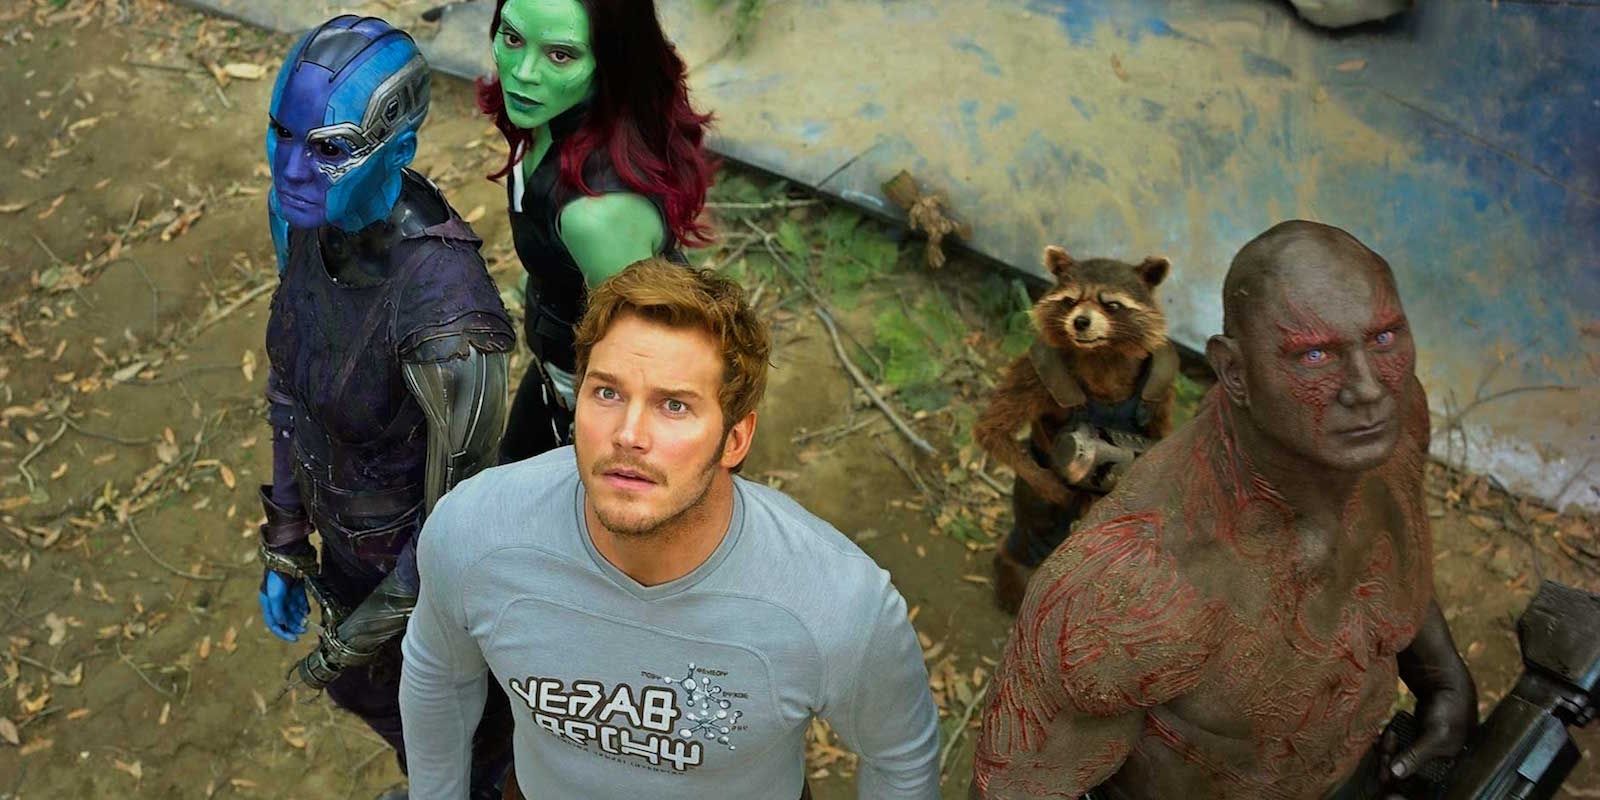 Guardians of the Galaxy Vol 2 Empire Photo Cropped